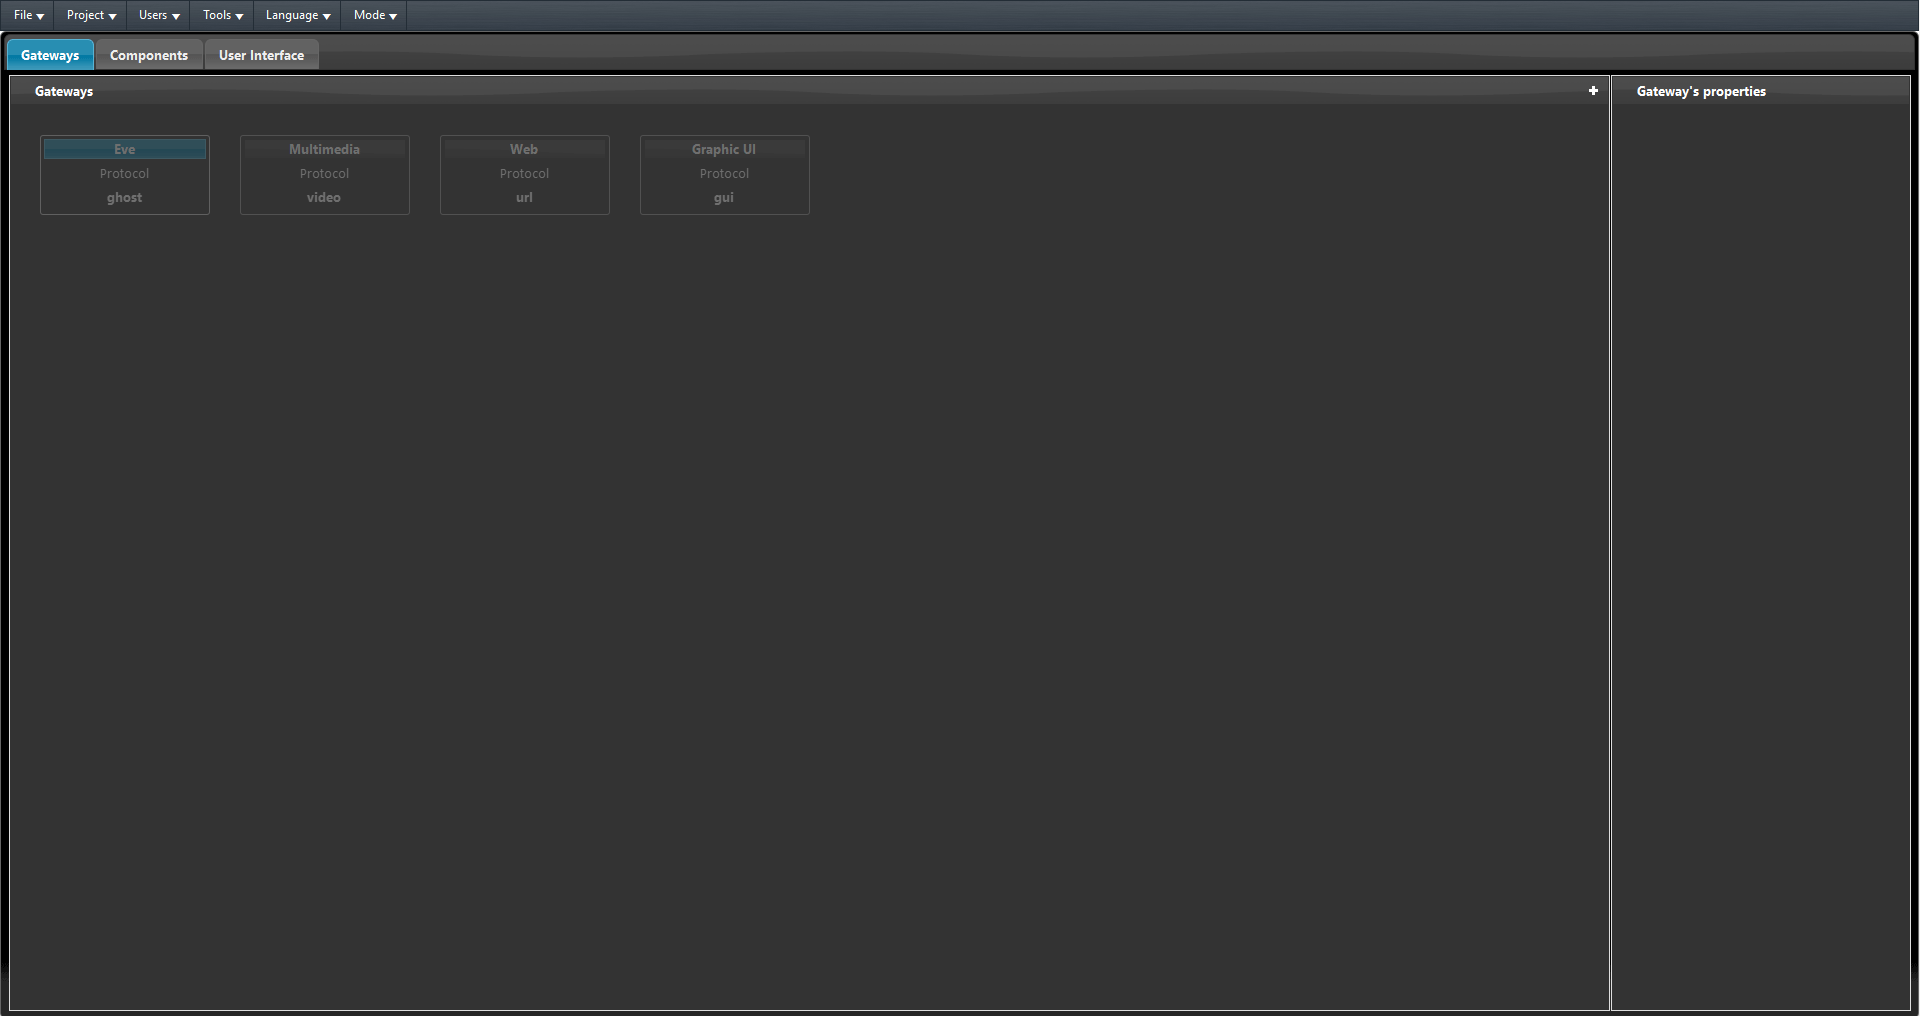 How the gateway tab looks like inside the Home automation configuration software EVE Manager Pro